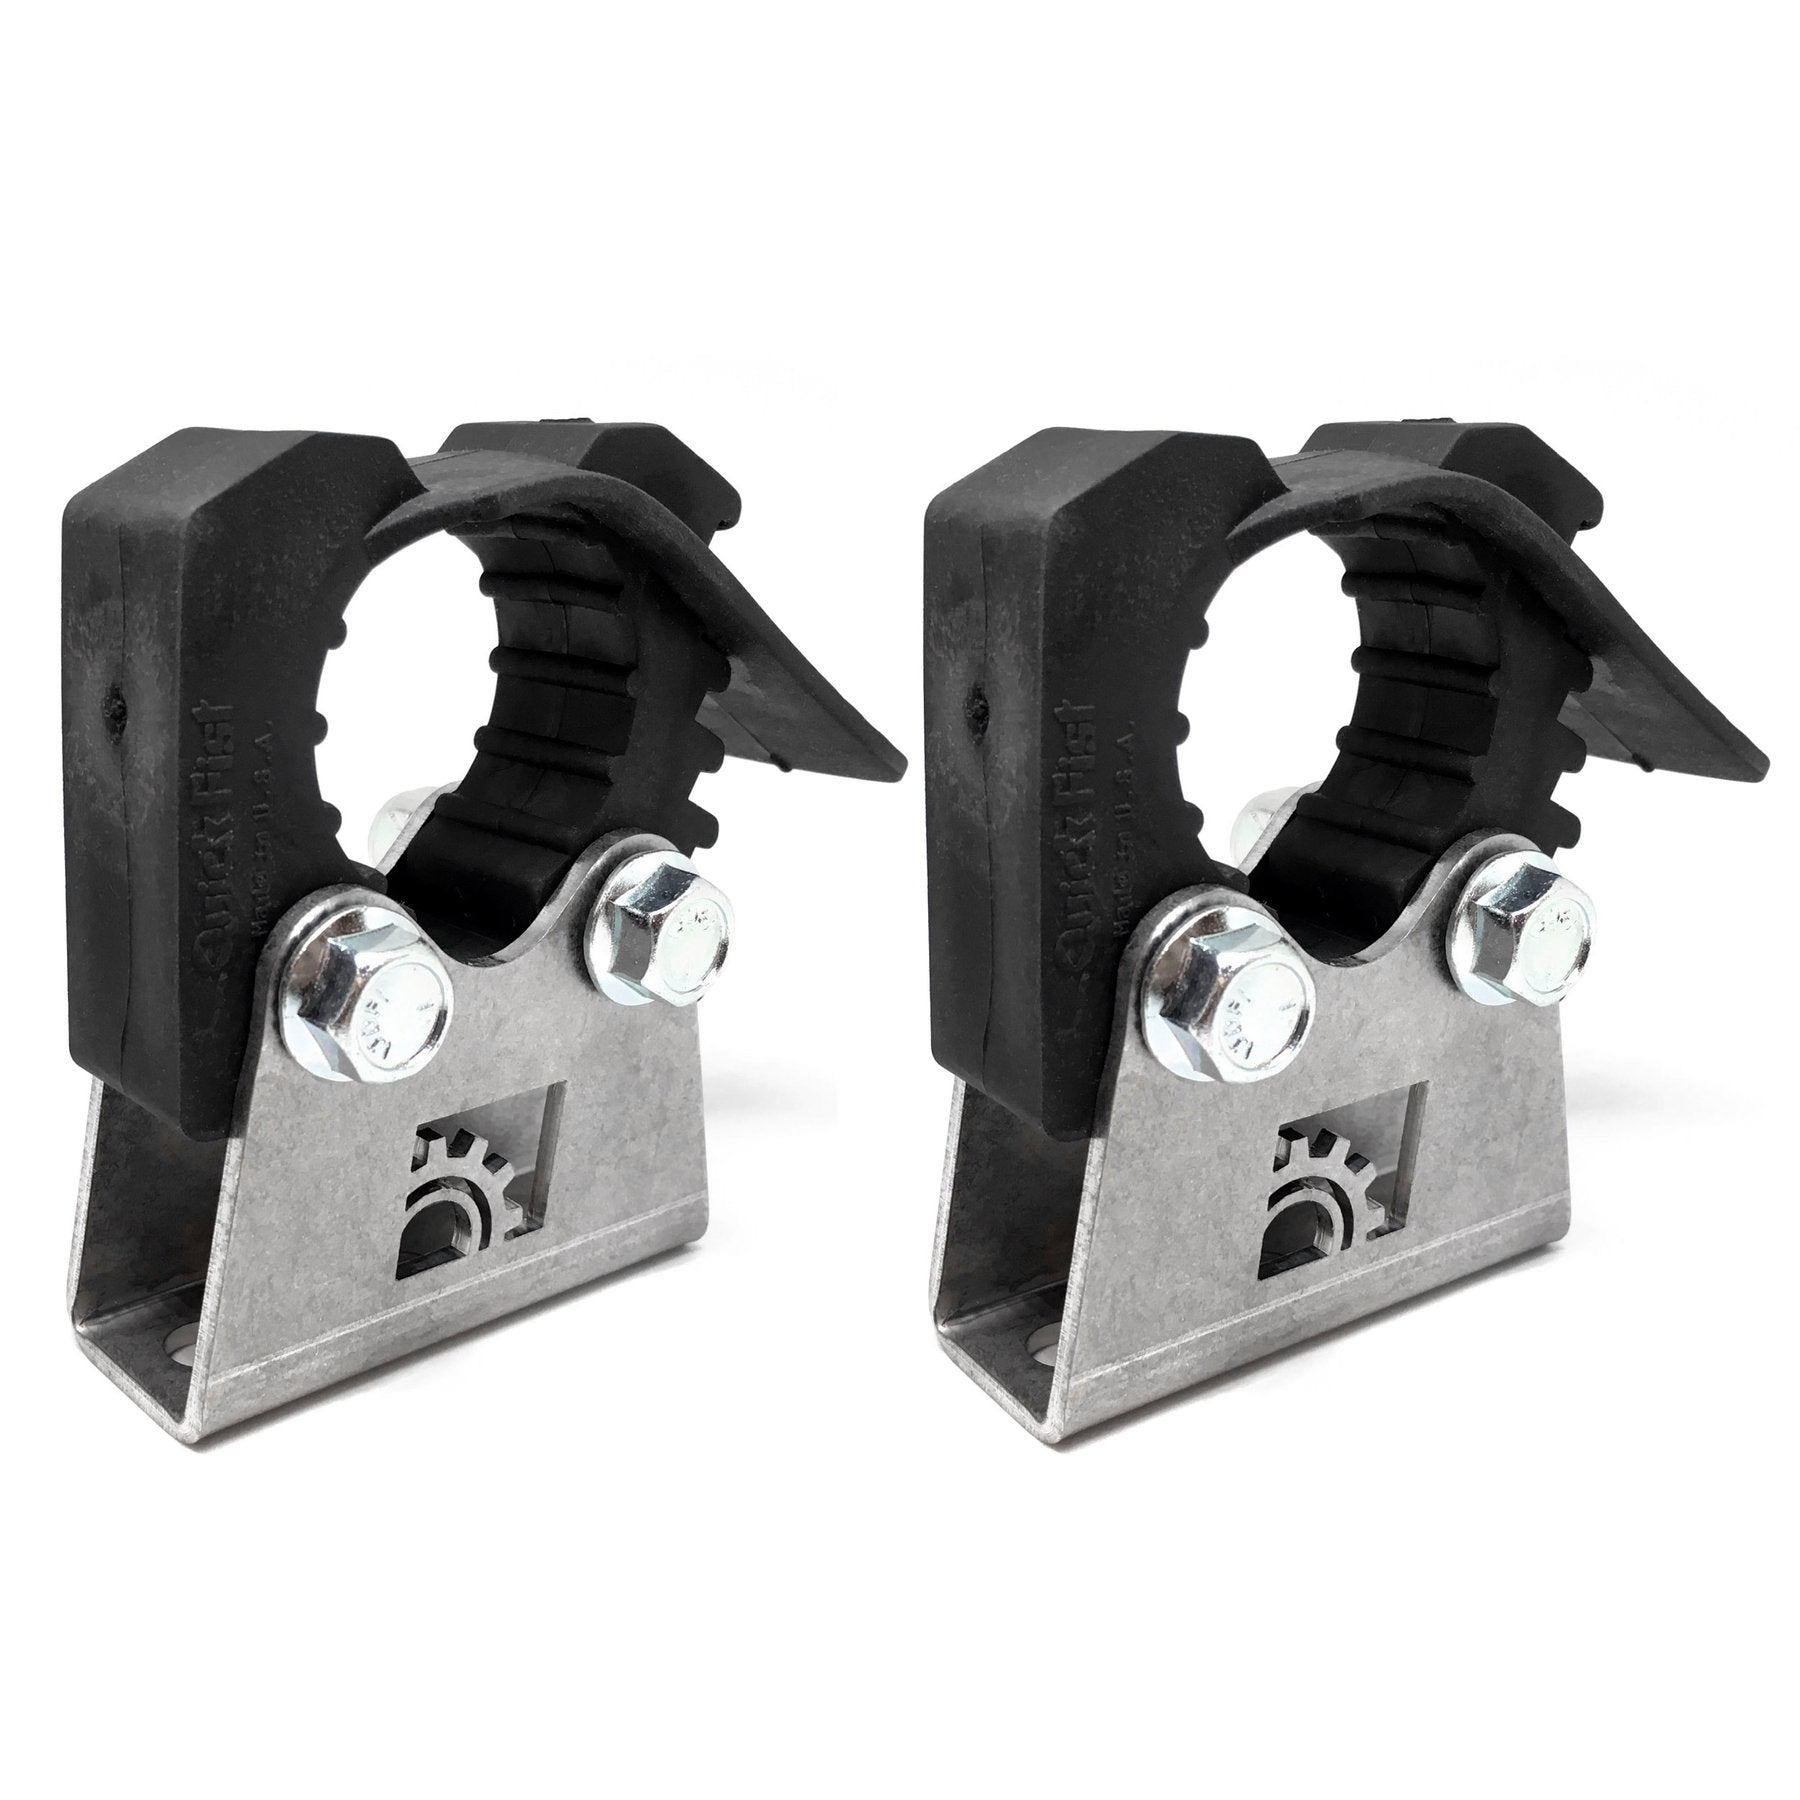 Riser Mount (Pair) - For 1" - 2.25" Clamps - 0